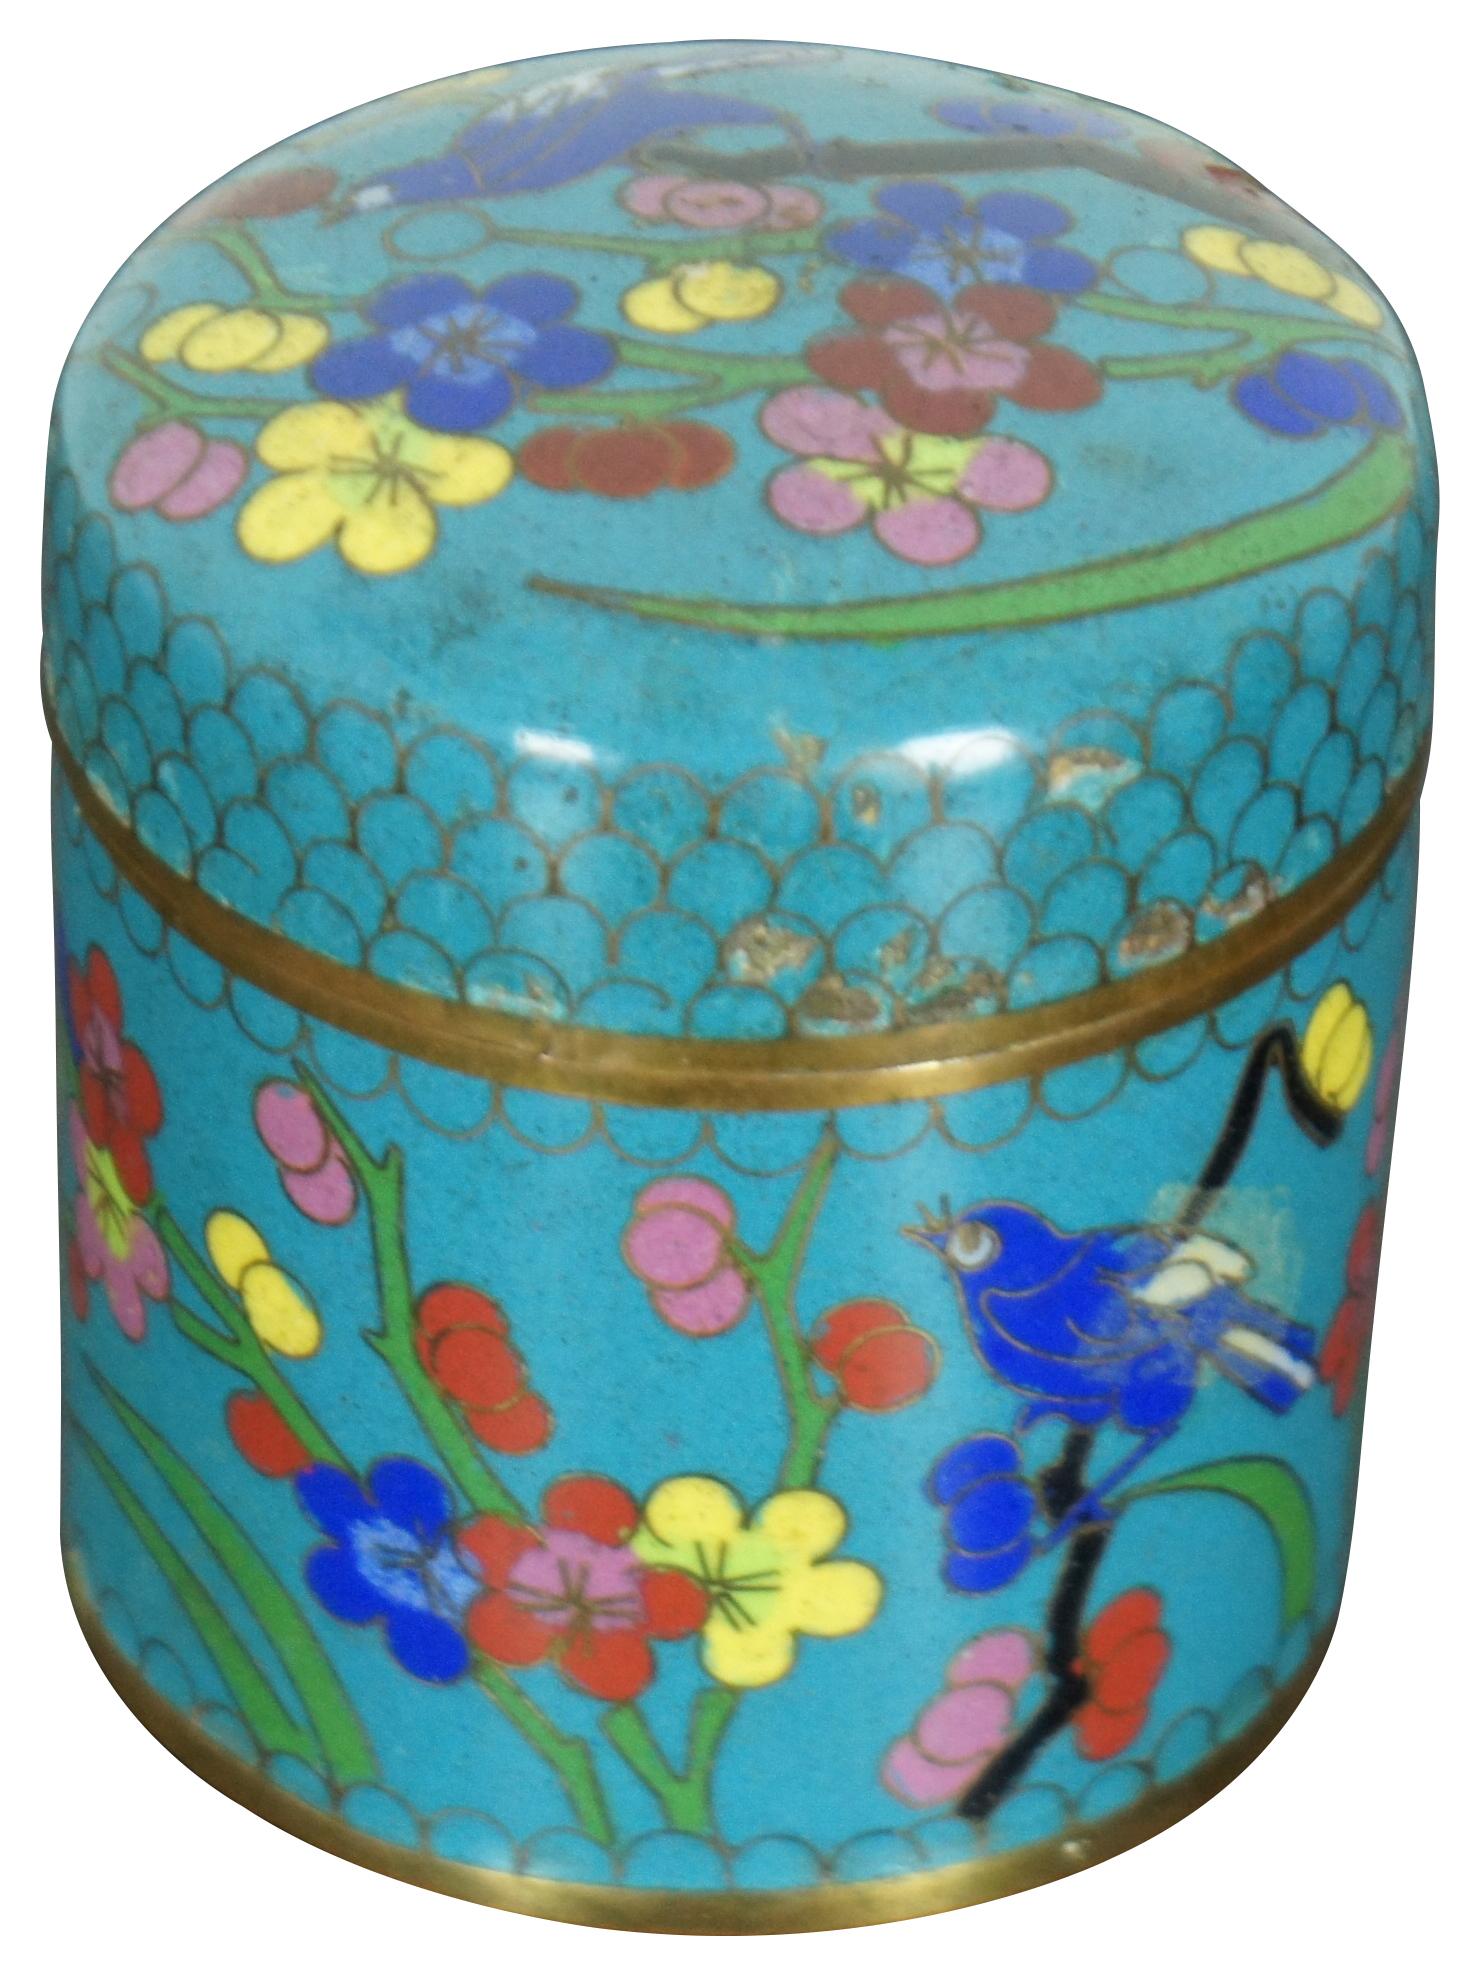 Vintage Chinese cloisonne enamel small tea caddy or canister featuring red and yellow flowers with blue birds on a turquoise ground.
